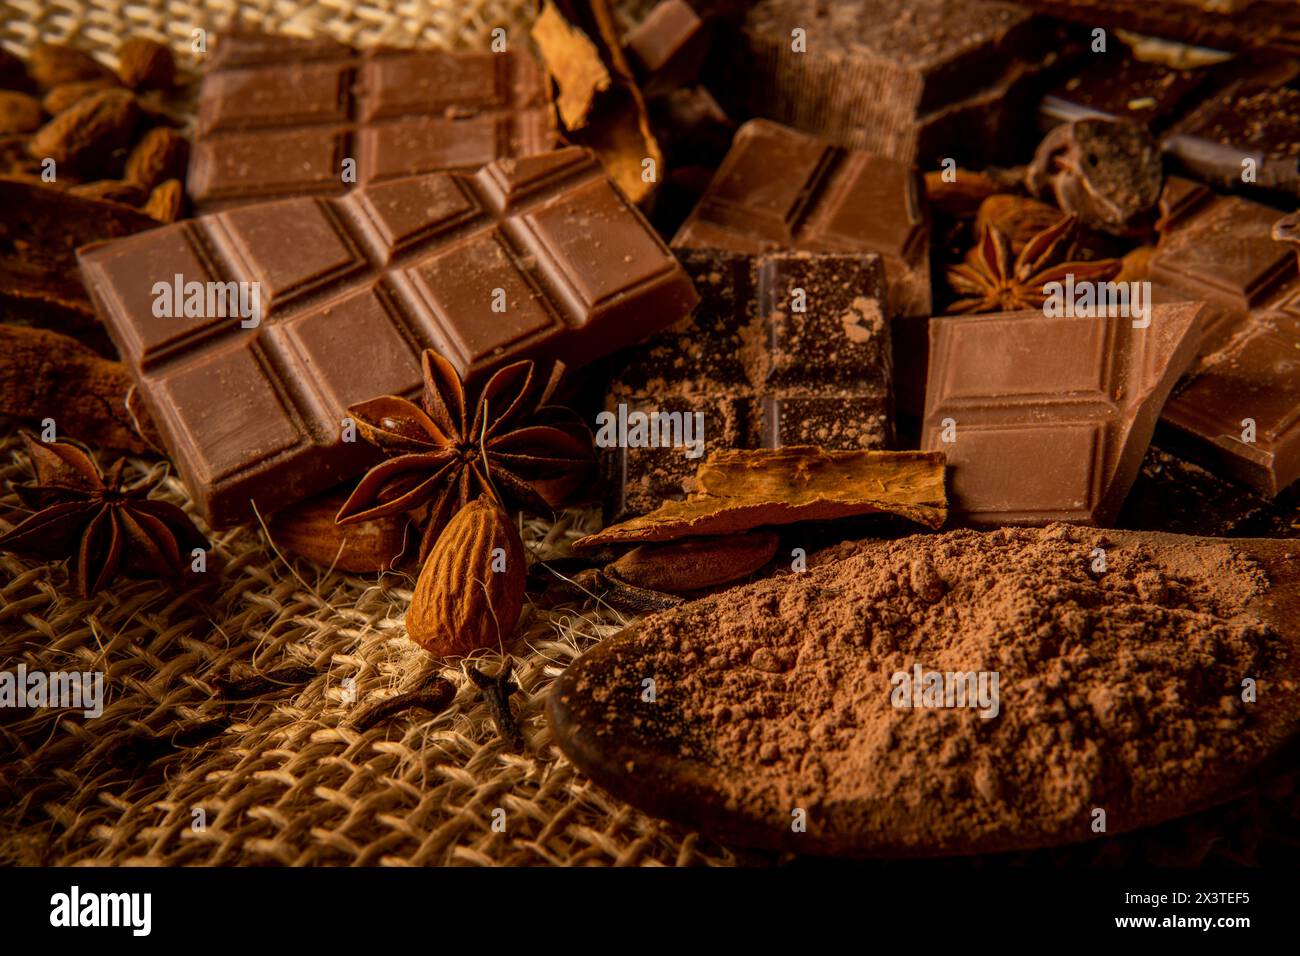 Still life with pieces of variety of chocolate and spices such as cinnamon, star anise and almonds on a jute background Stock Photo